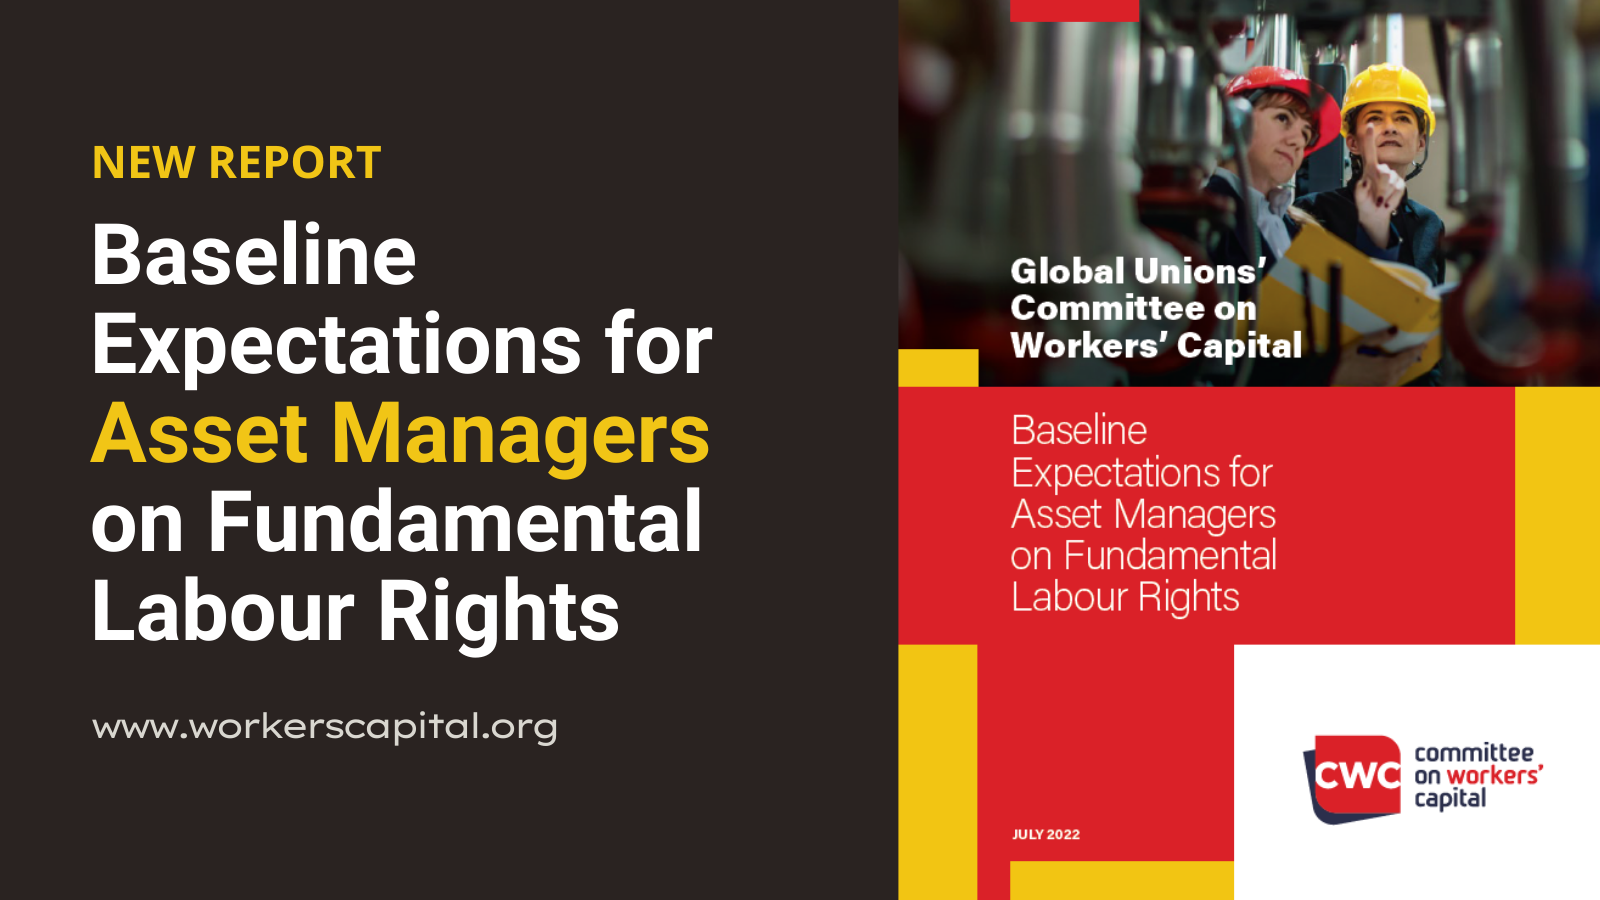 Baseline Expectations for Asset Managers on Fundamental Labour Rights